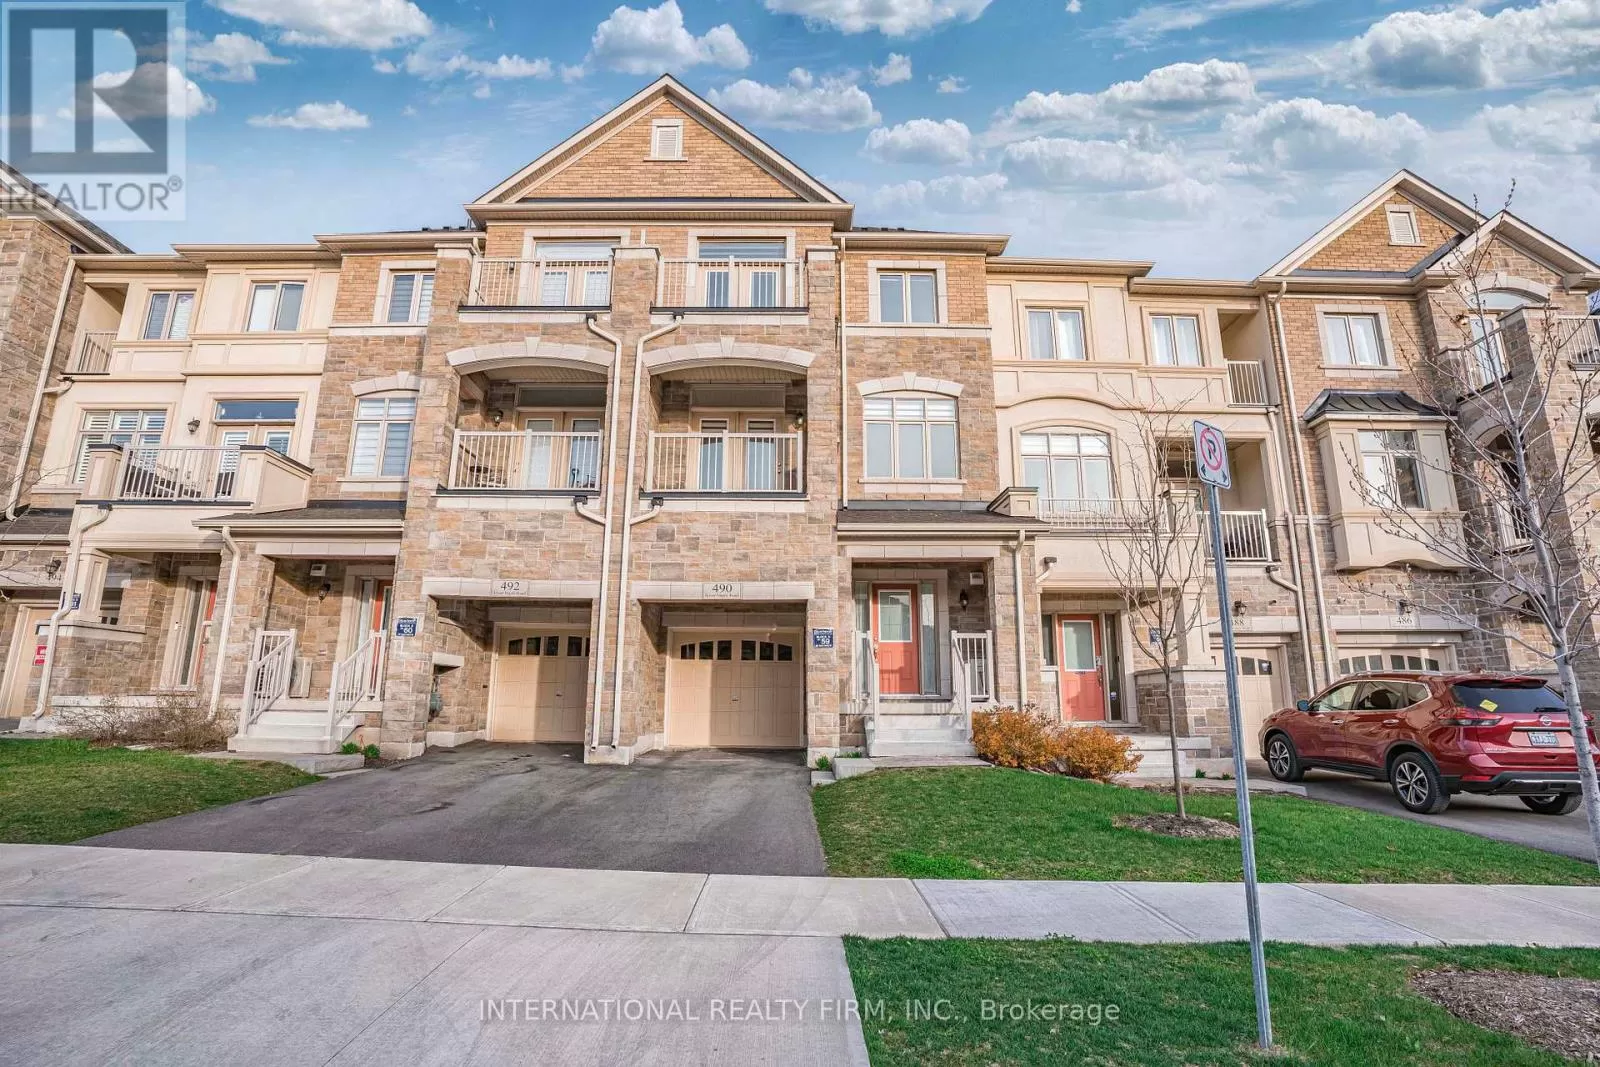 Row / Townhouse for rent: 490 Silver Maple Road, Oakville, Ontario L6H 3P6